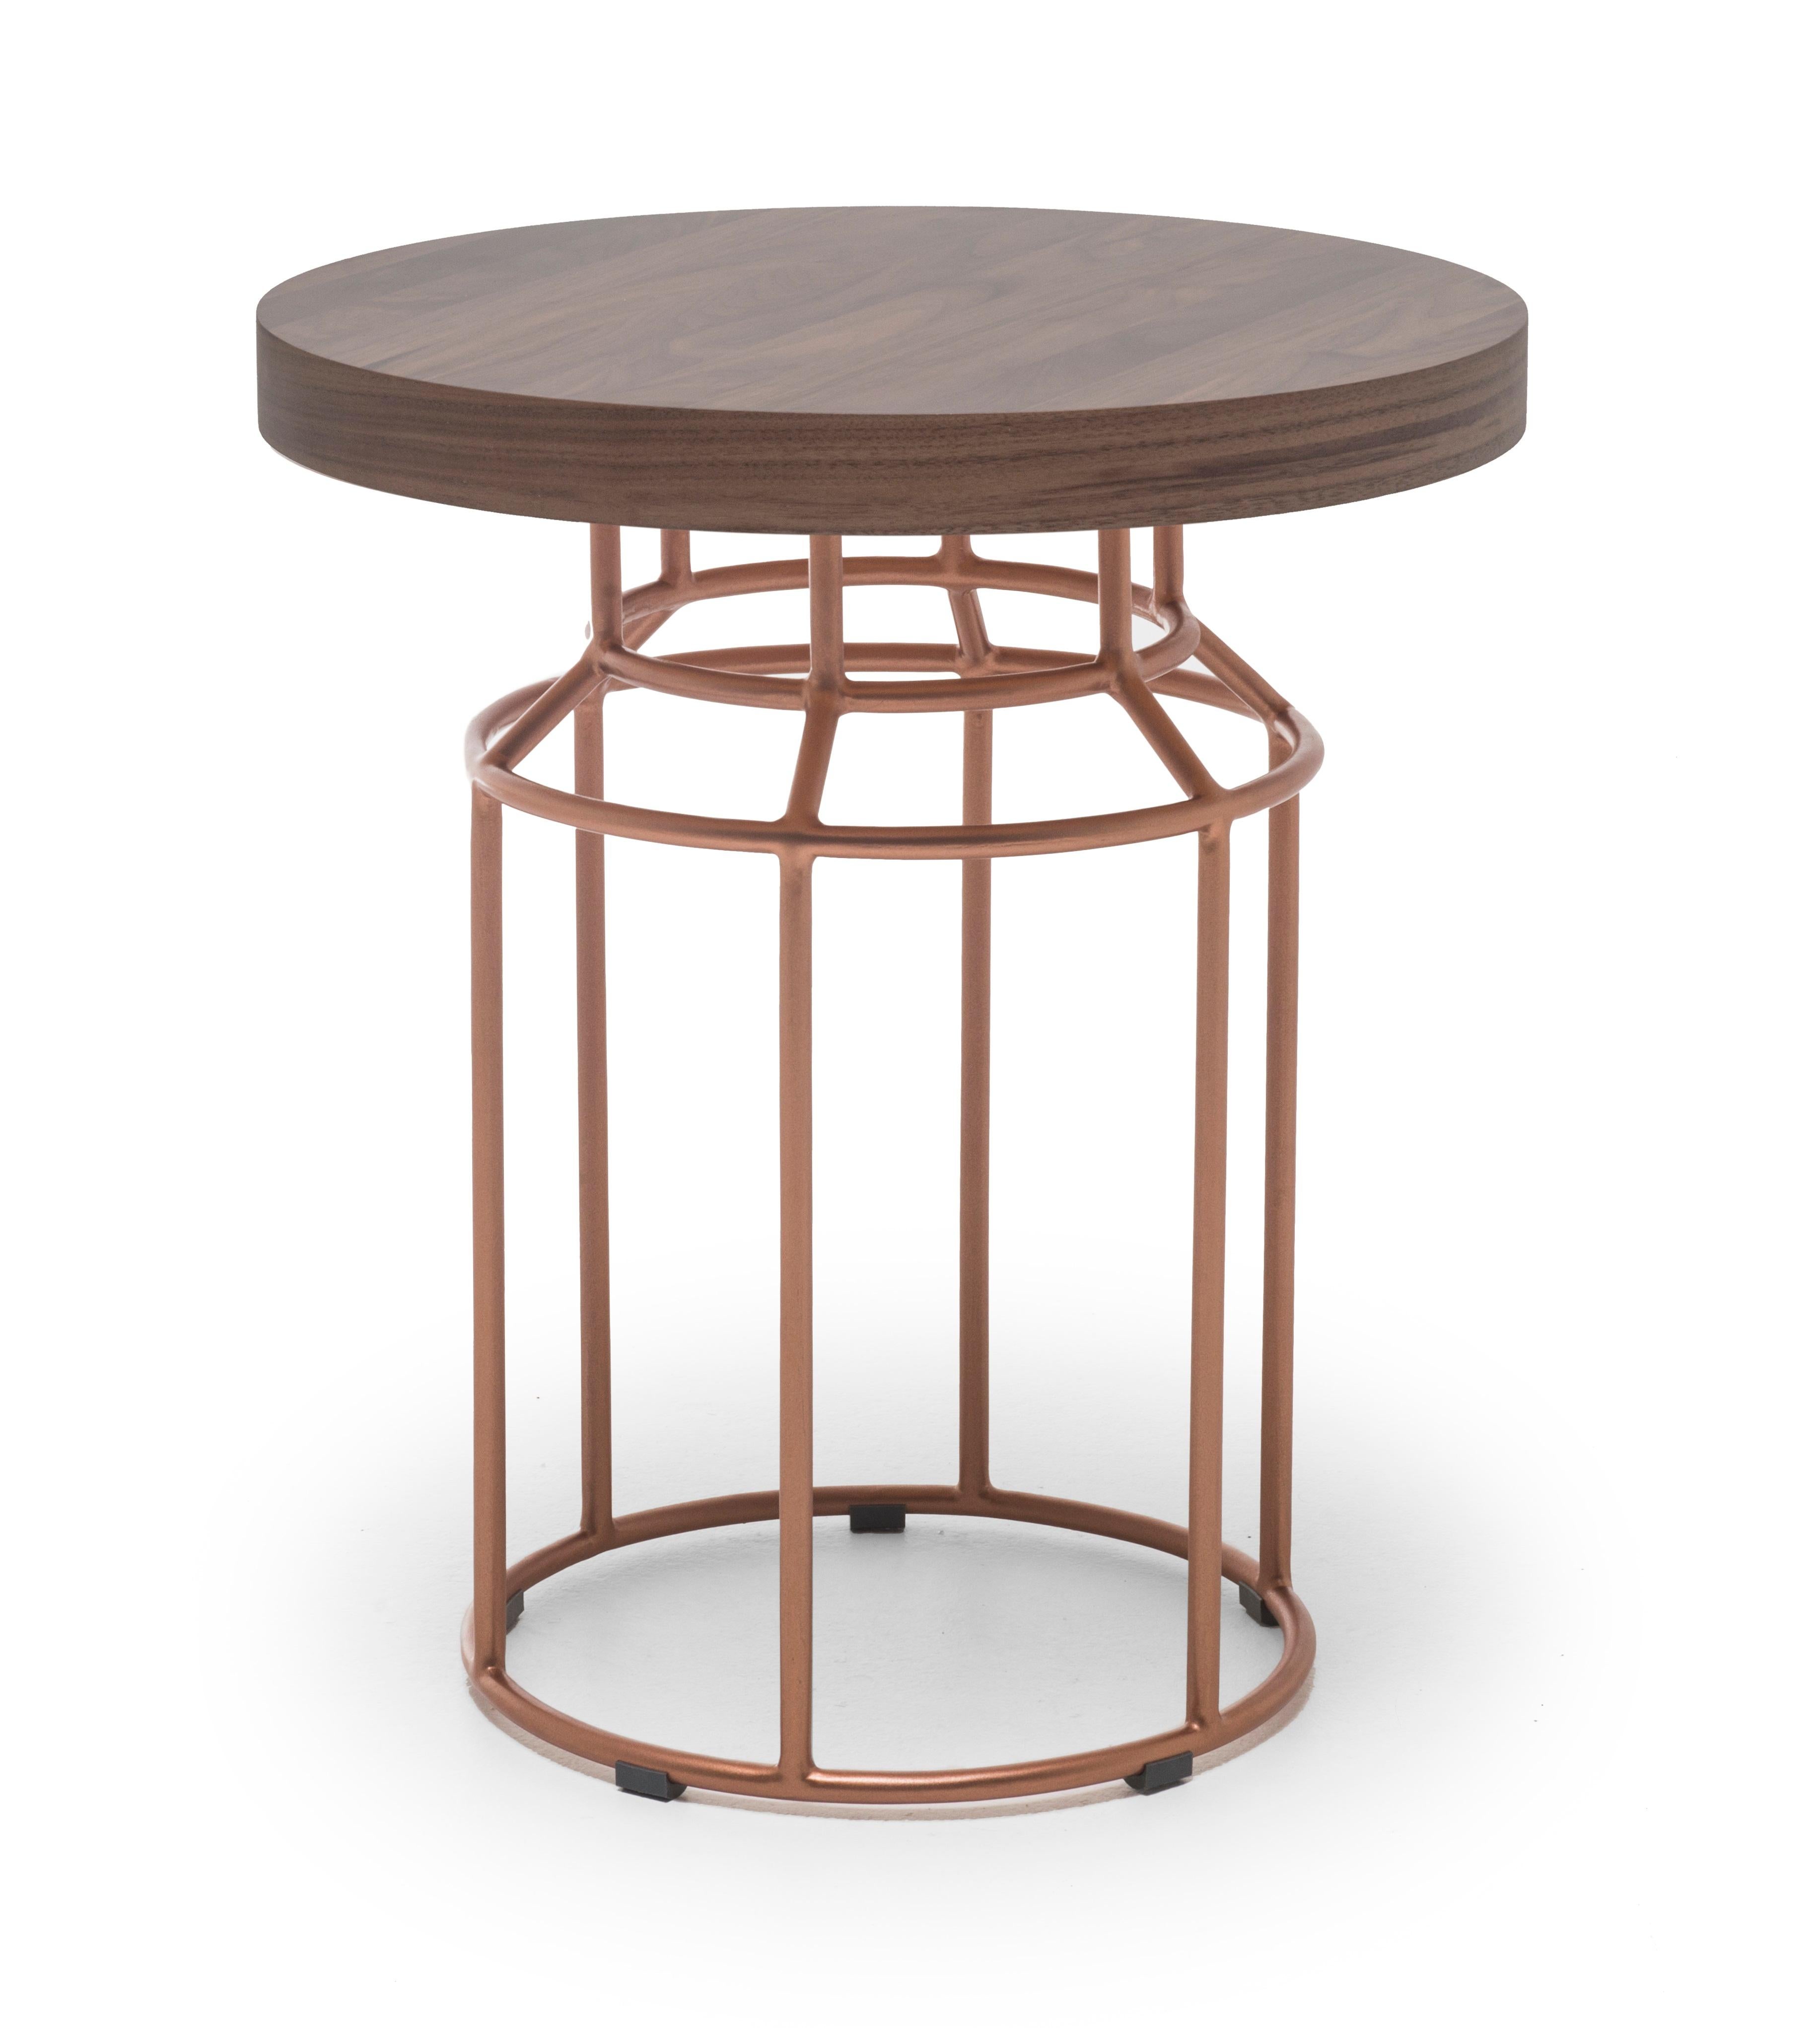 Indoor Mason end table by Kenneth Cobonpue.
Materials: walnut, steel. 
Also available in other colors and for outdoors.
Dimensions: diameter 50cm x height 55cm.

Jars are typically placed on shelves and cupboards. Mason is a reimagining of